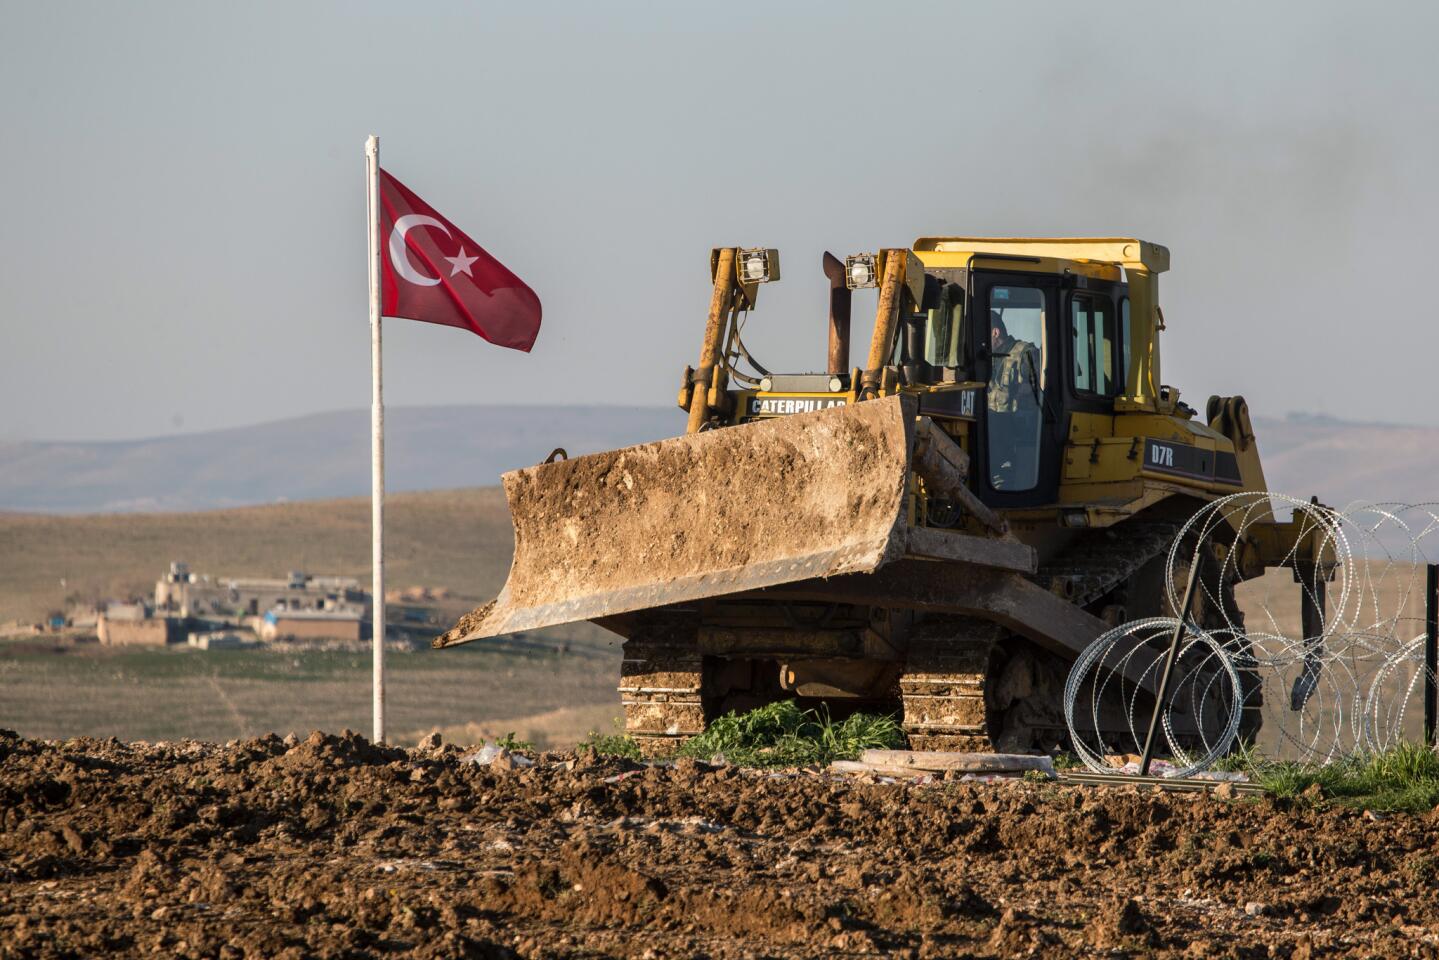 Turks work to build a new Ottoman tomb in Esme village in Aleppo province, Syria. Turkey launched an overnight military operation into neighboring Syria to evacuate troops guarding an Ottoman tomb and to move the crypt to a new location.